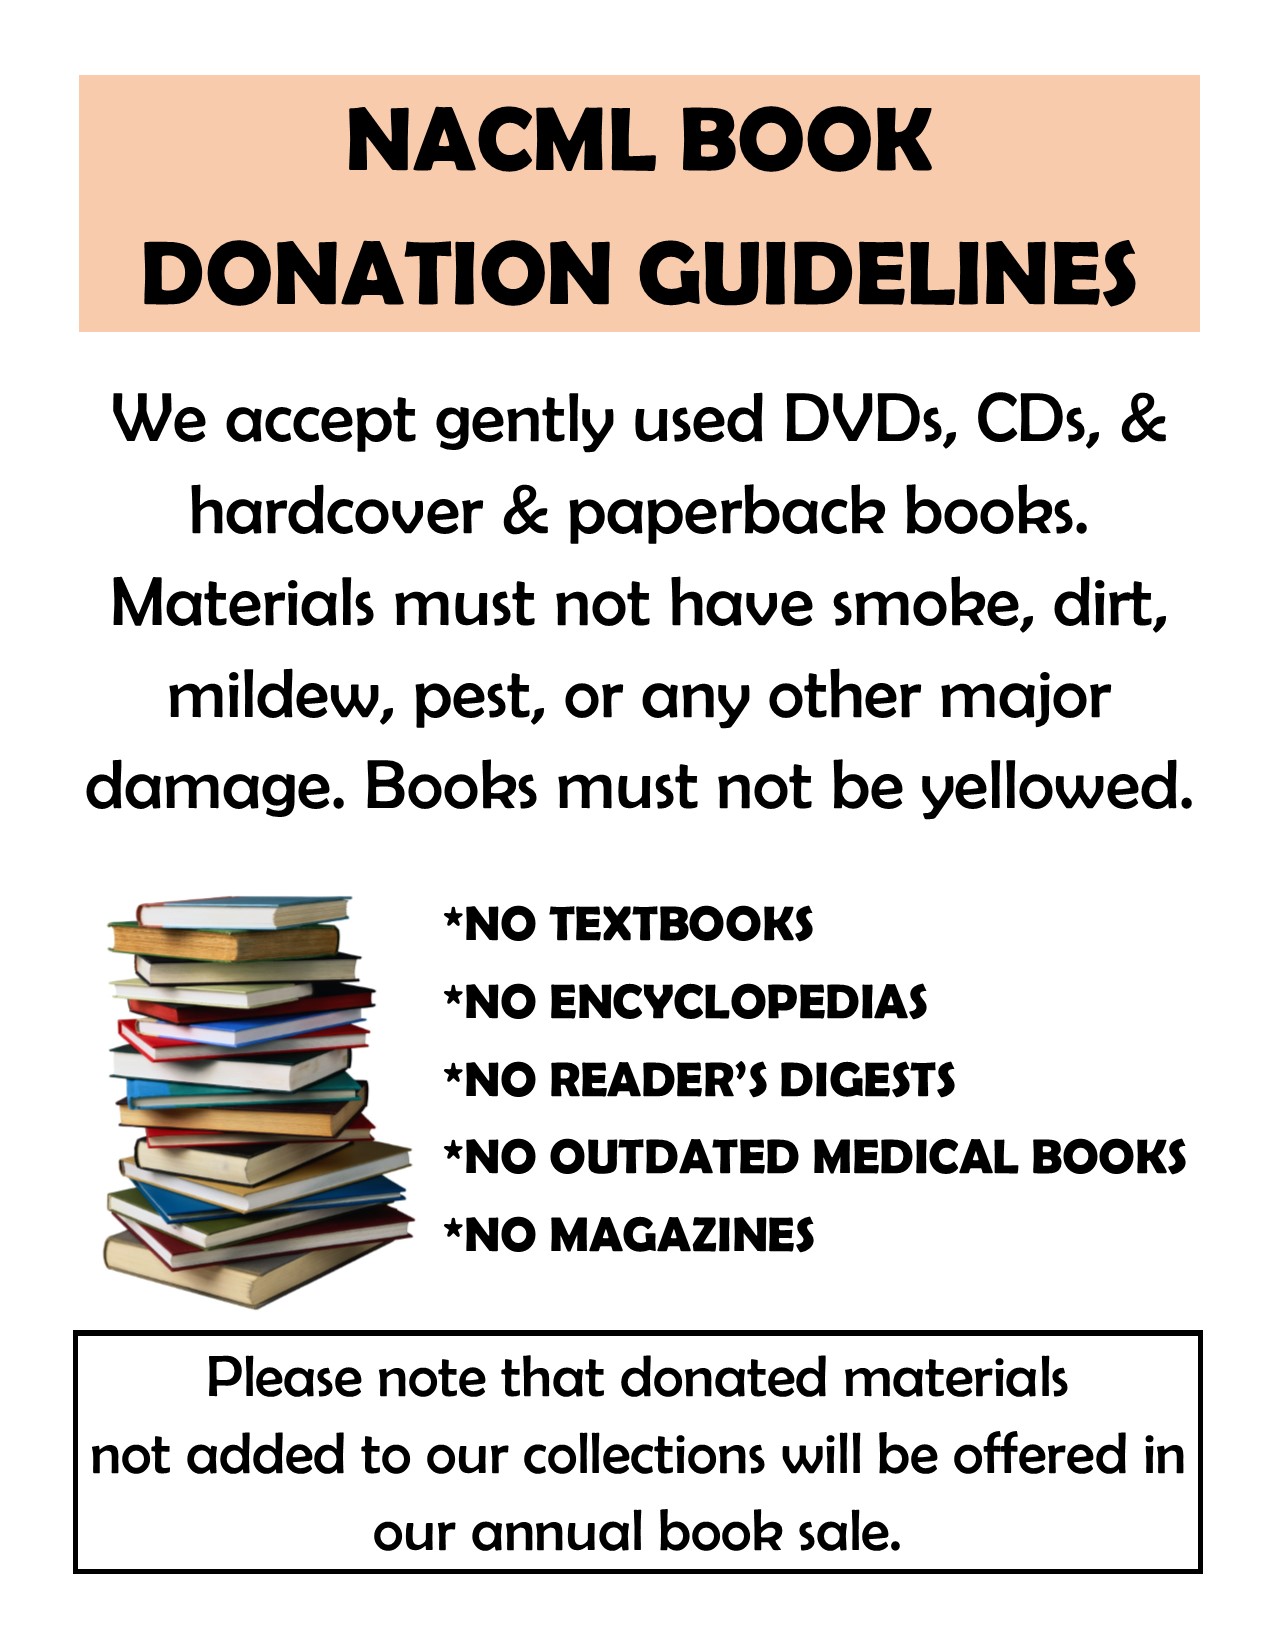 Donations Guidelines.jpg